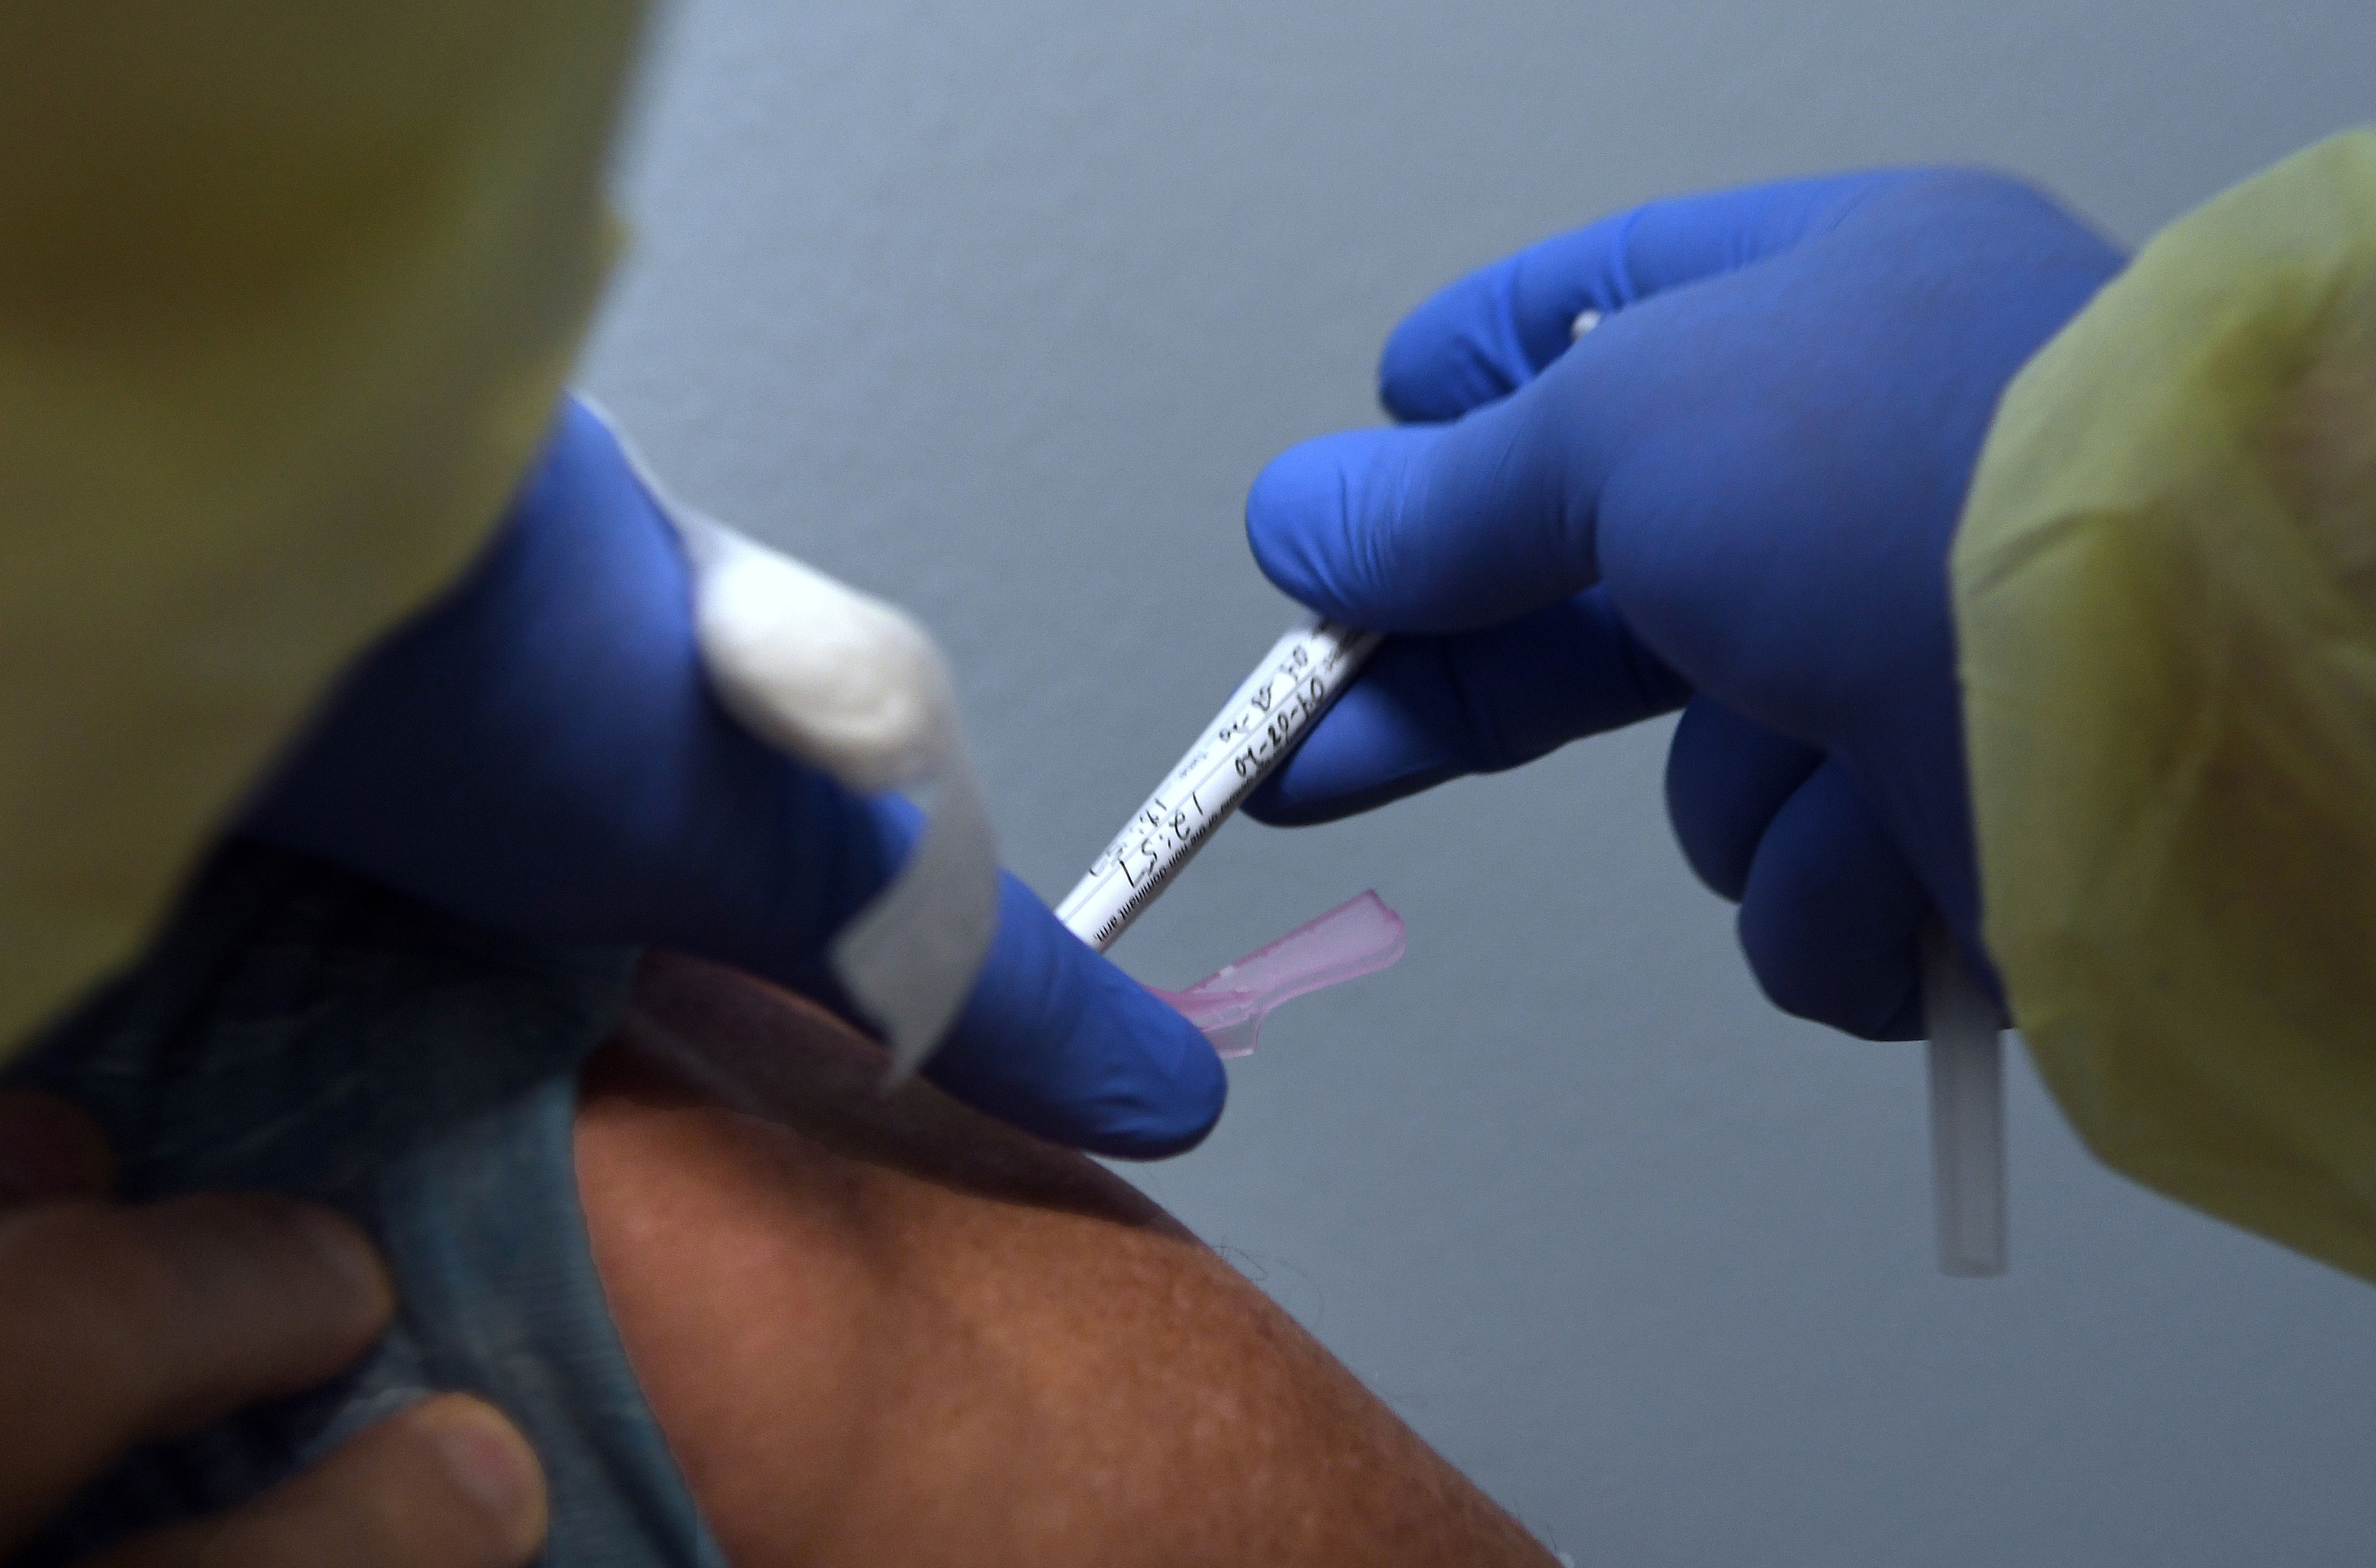 Tony Potts, a 69-year-old retiree living in Ormond Beach, receives his first injection as a participant in a Phase 3 Covid-19 vaccine clinical trial sponsored by Moderna at Accel Research Sites on August 4 in DeLand, Florida.